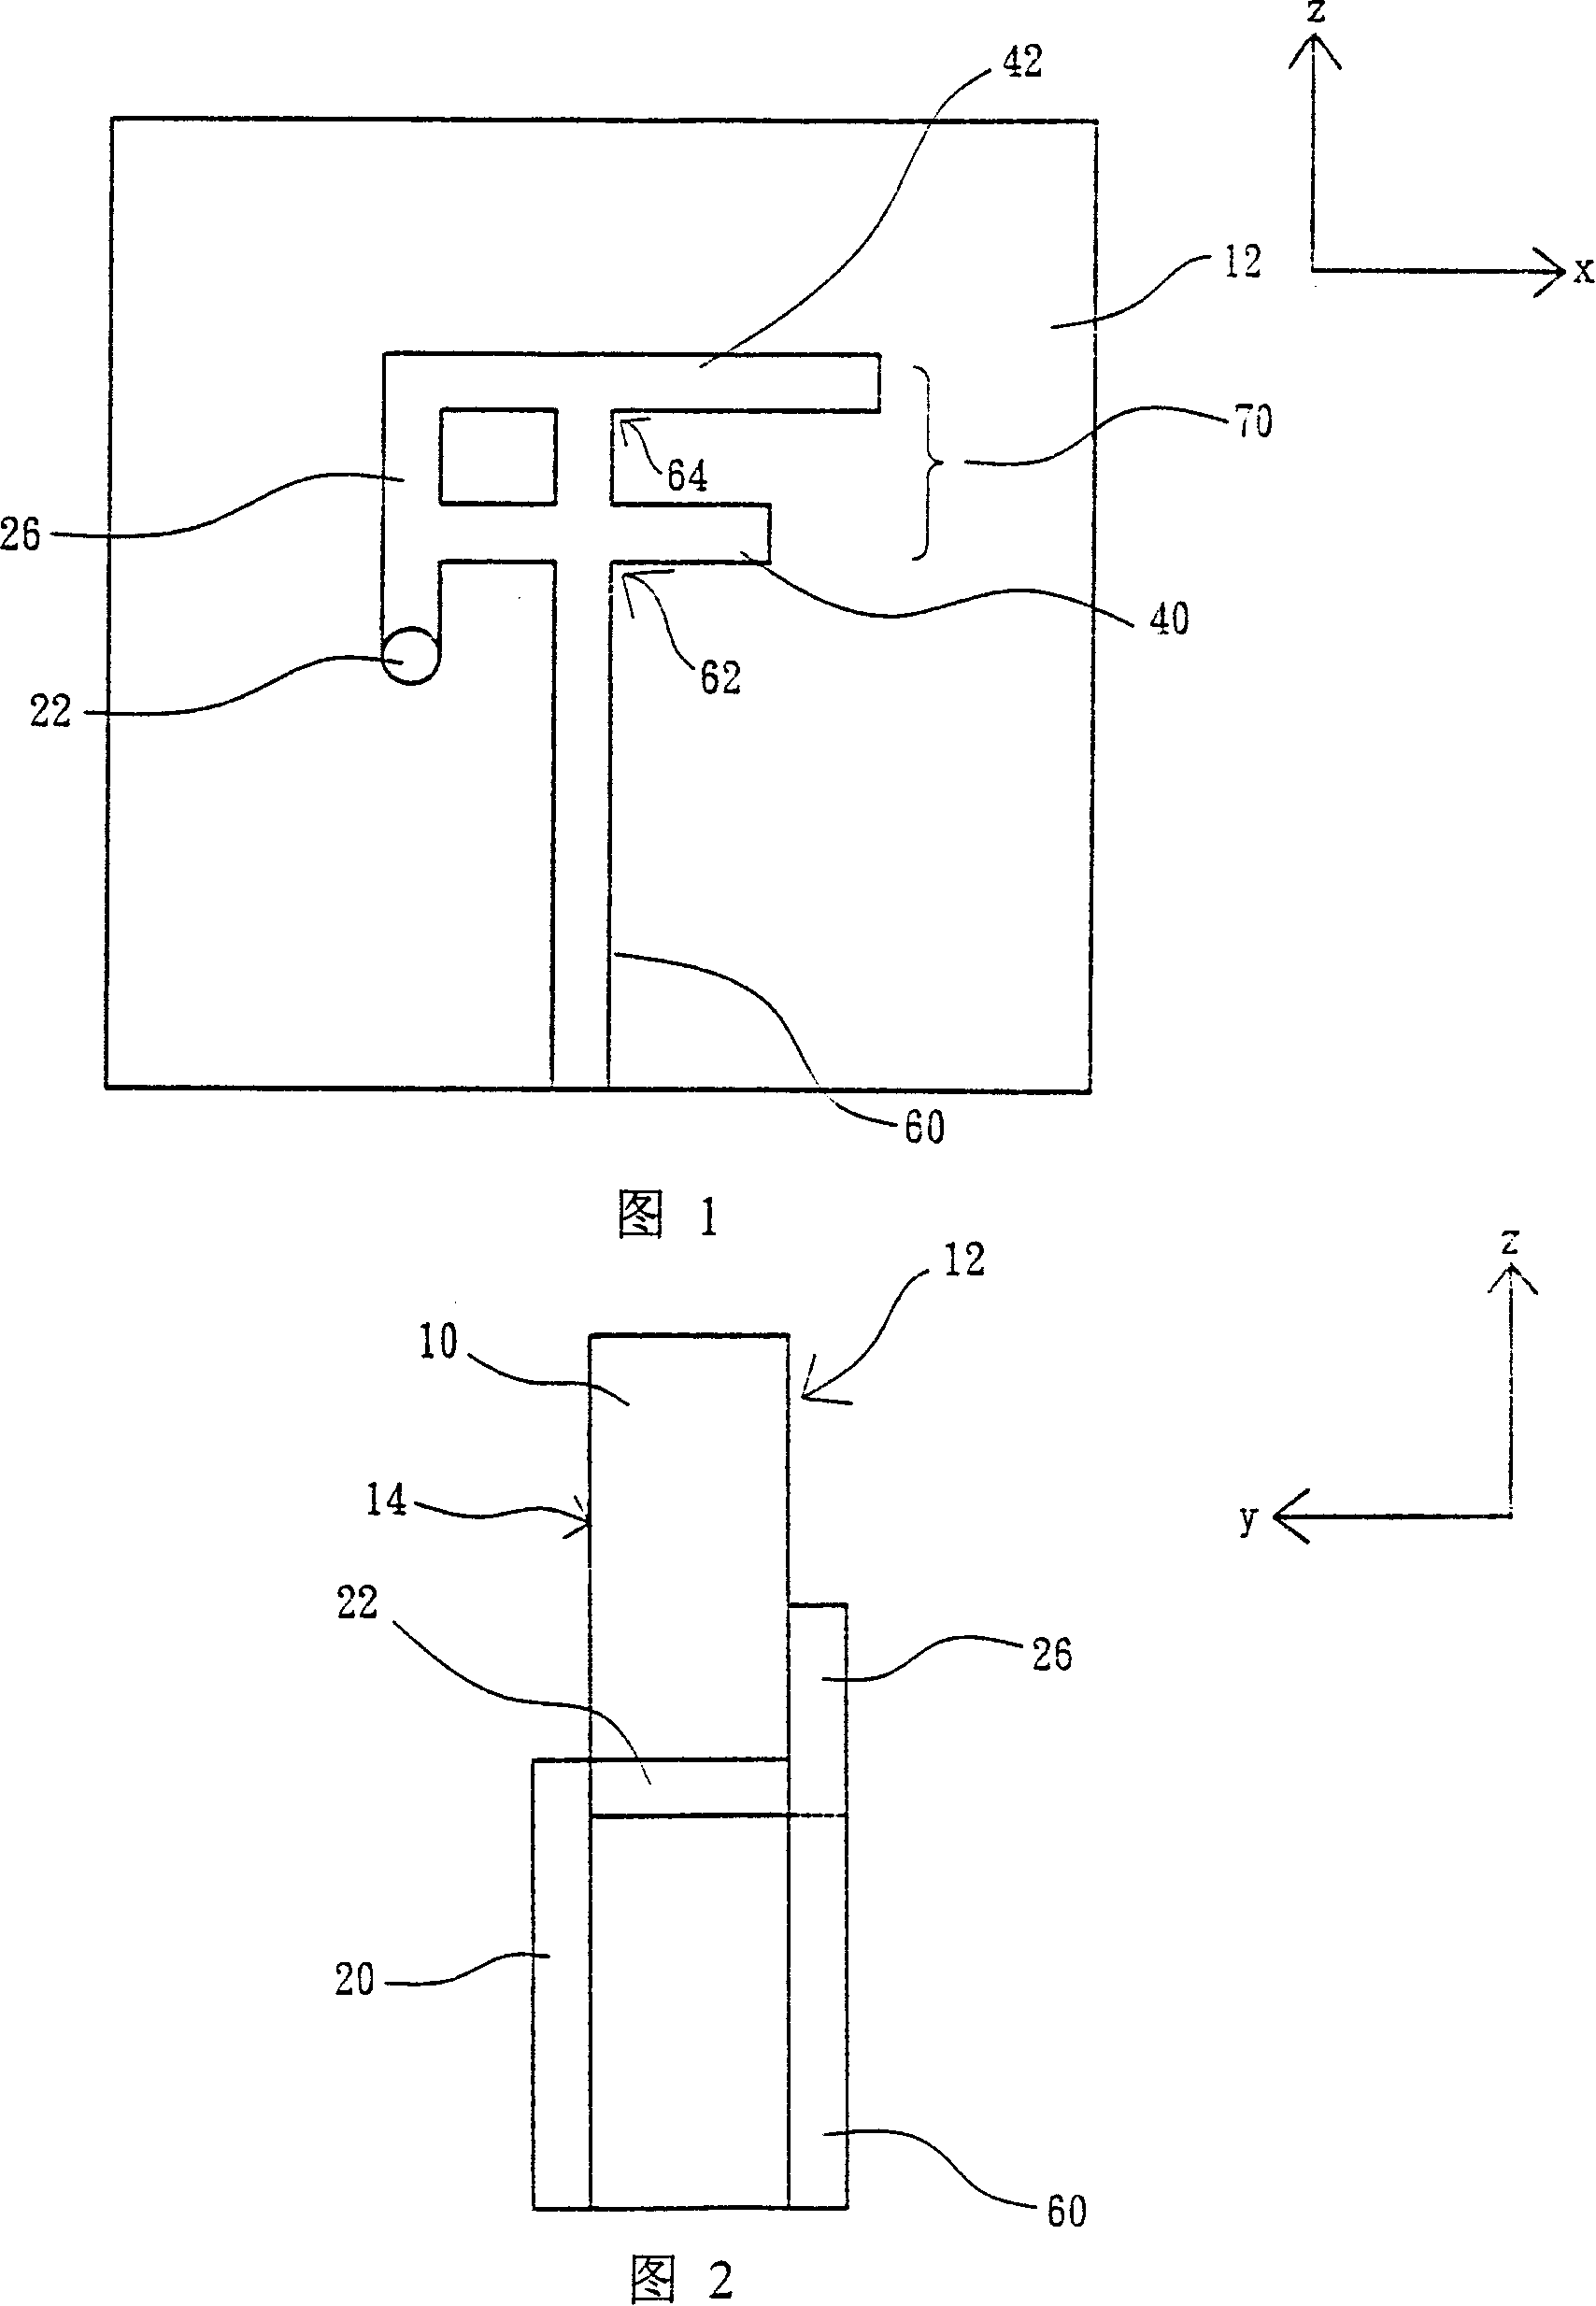 Double-frequency inverted F-type antenna